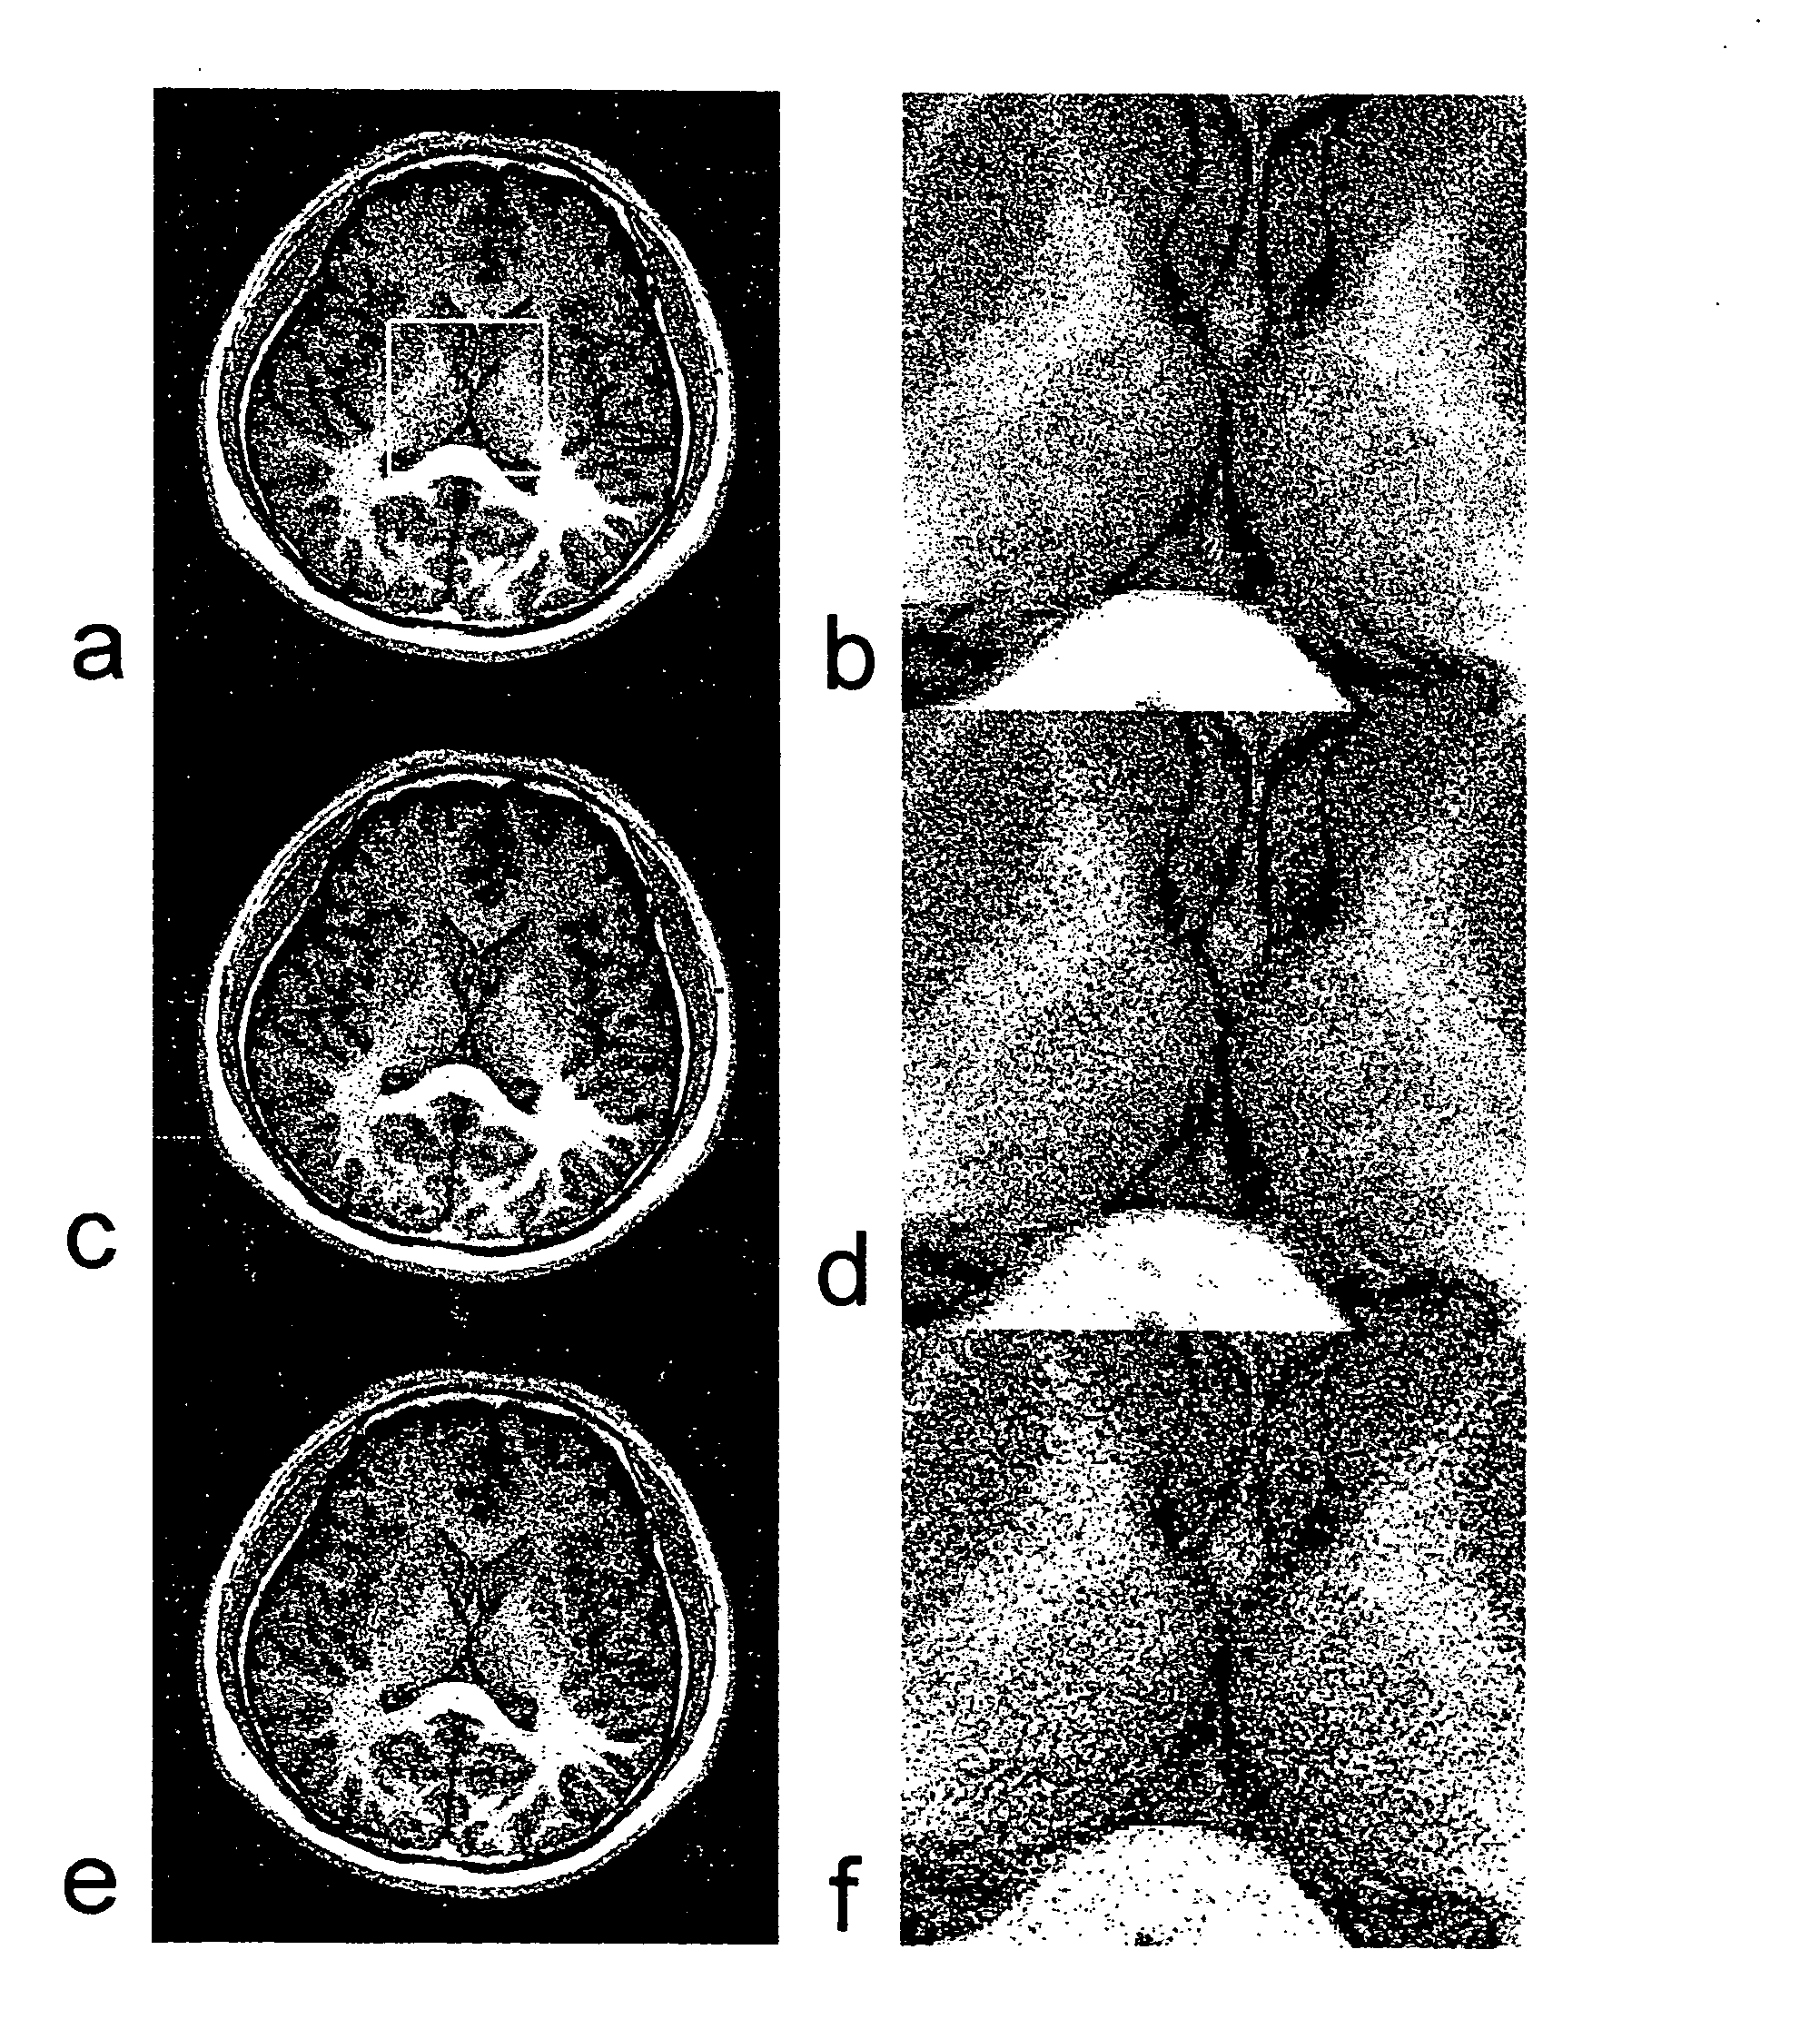 Method and Apparatus for Parameter Free Regularized Partially Parallel Imaging Using Magnetic Resonance Imaging